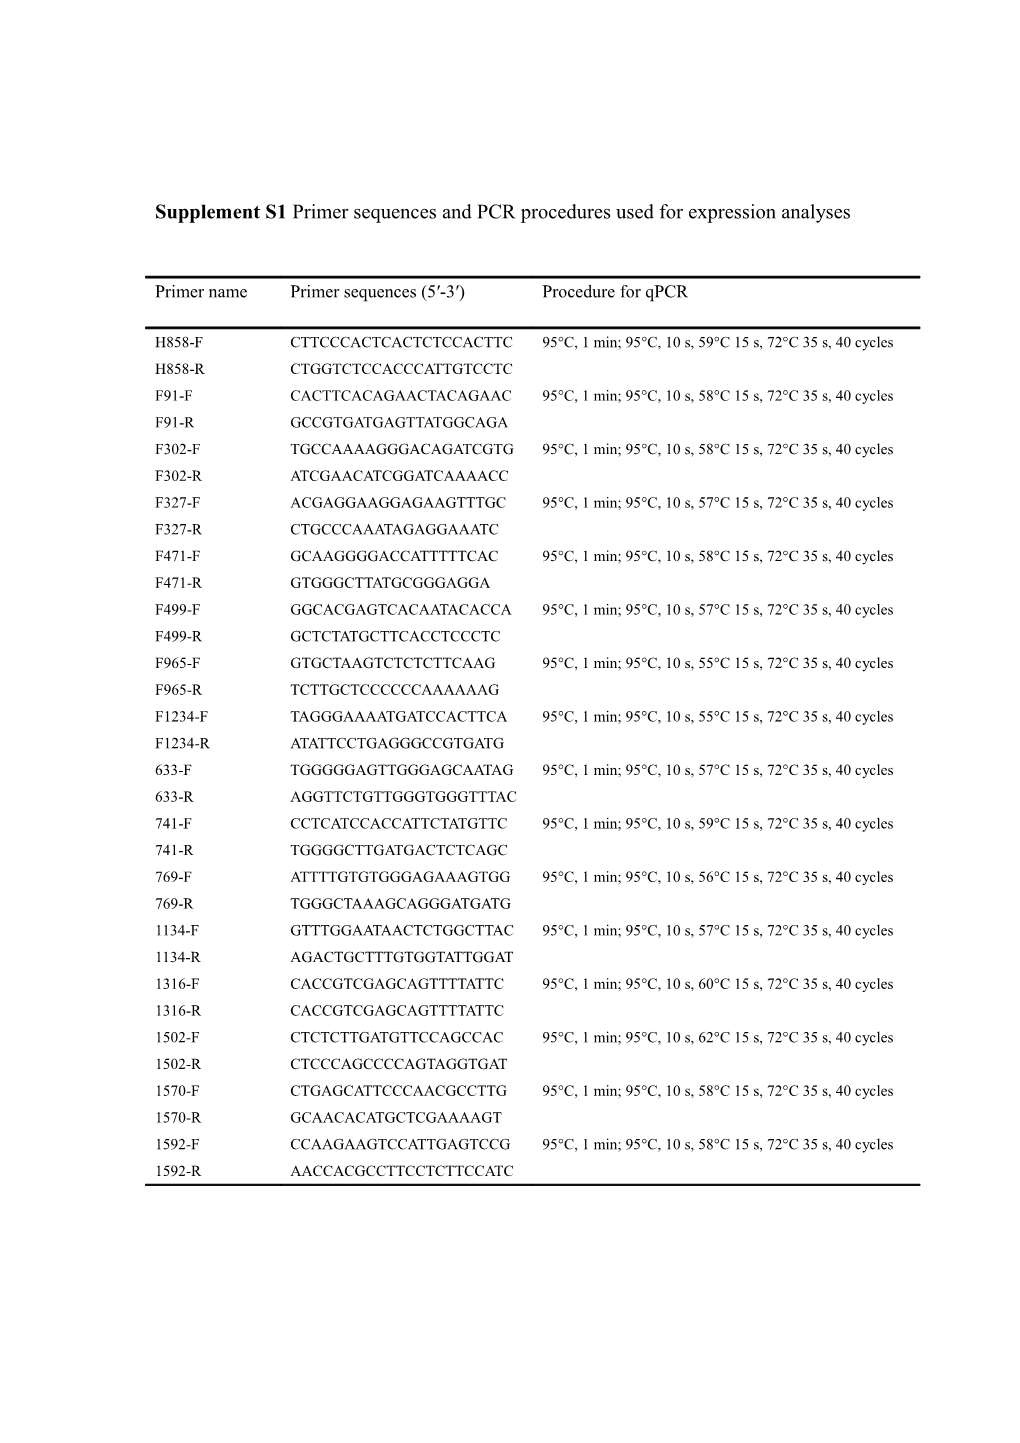 Supplement S1primer Sequences and PCR Procedures Used for Expression Analyses